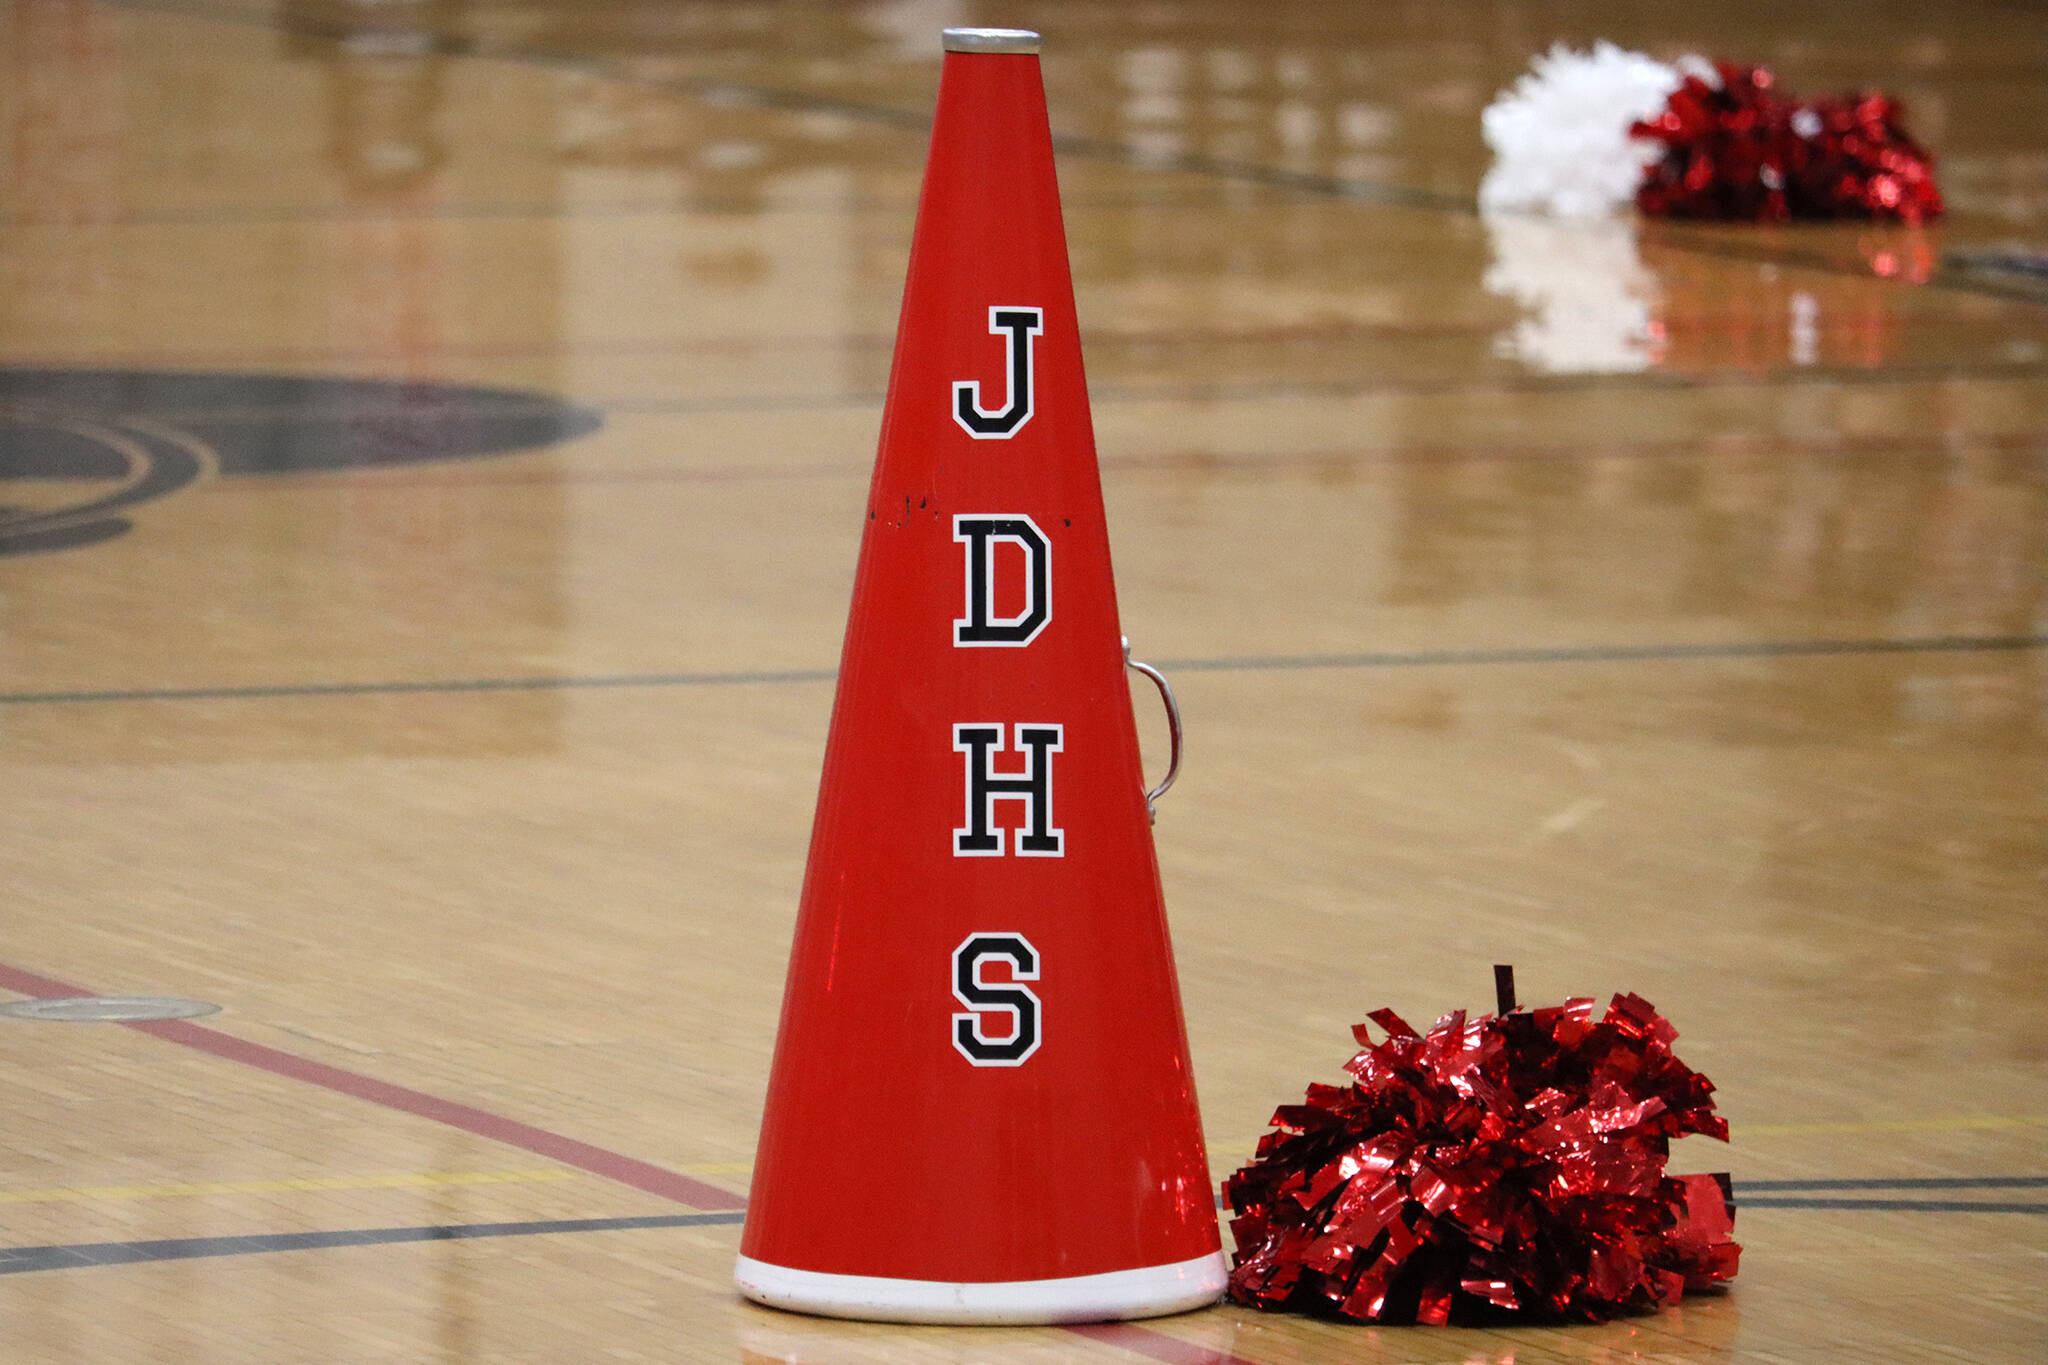 Both JDHS boys and girls basketball teams finished up games in Las Vegas on Thursday as part of the Tarkanian Classic tournament. (Ben Hohenstatt / Juneau Empire File)